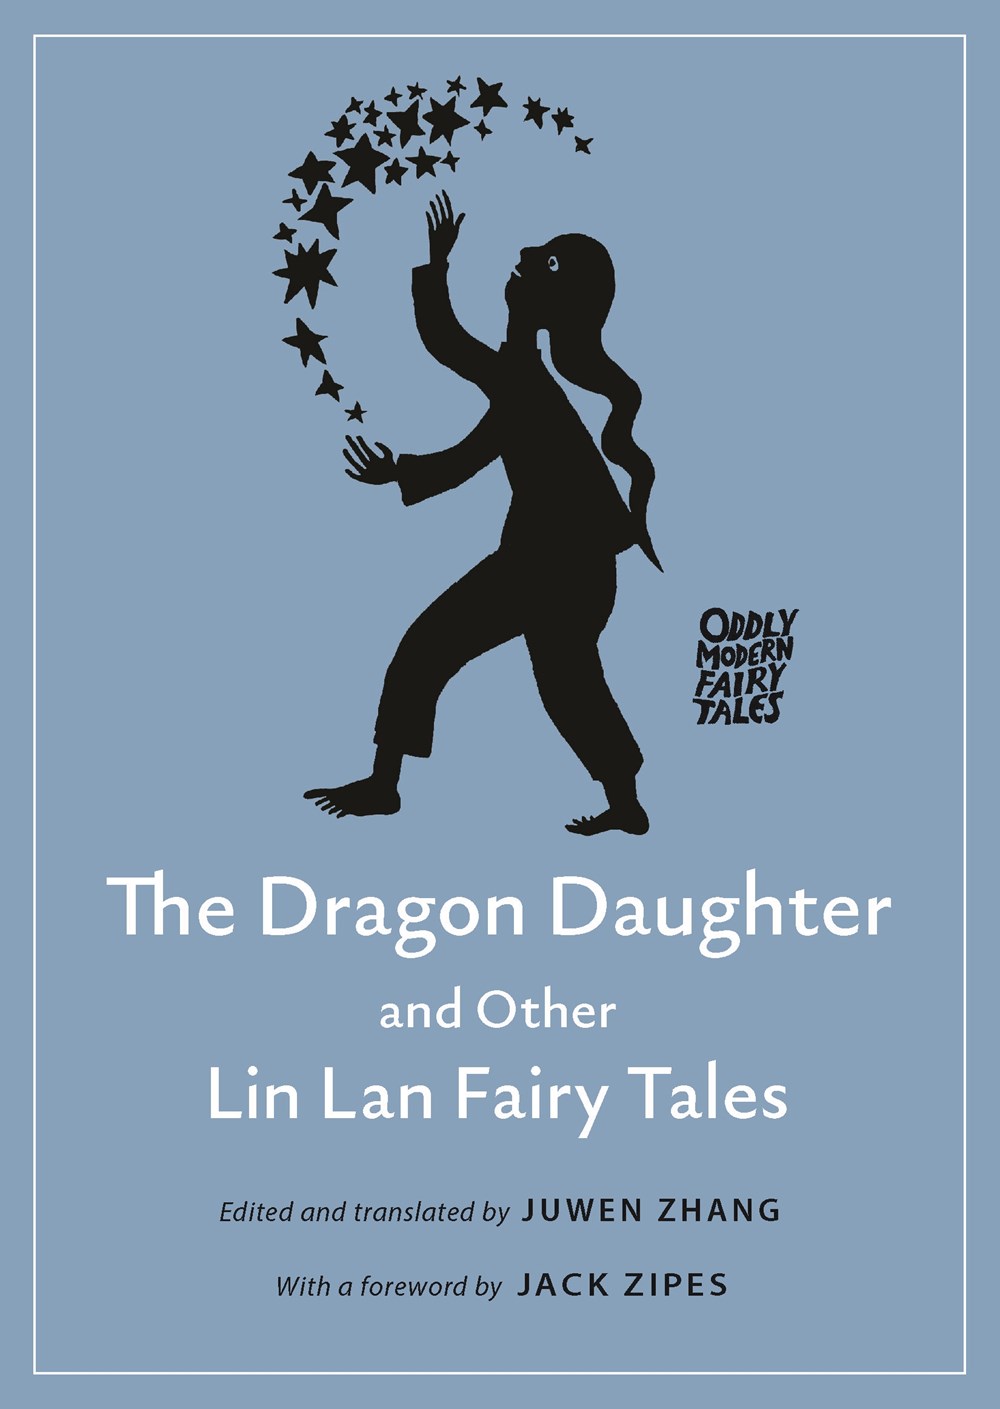 The Dragon Daughter and Other Lin Lan Fairy Tales